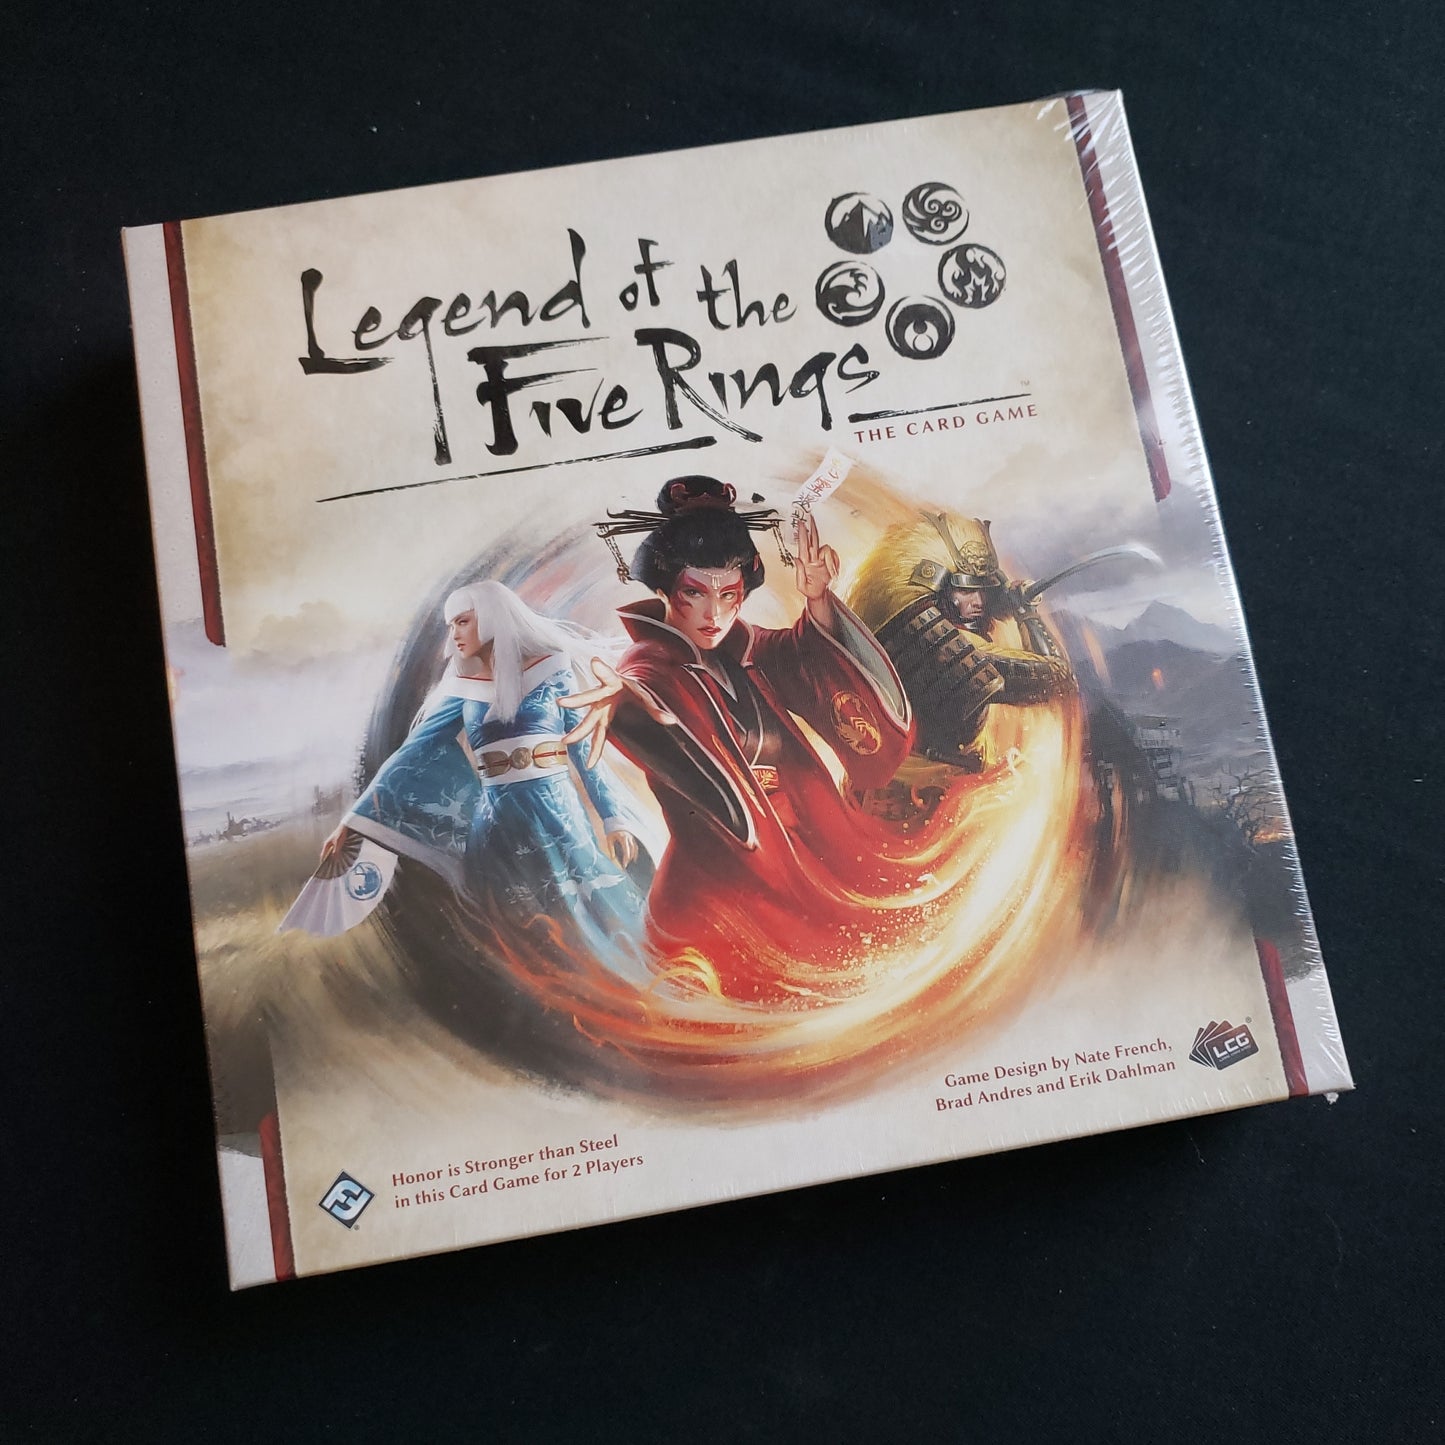 Image shows the front cover of the box of the Core Set for the Legend of the Five Rings Living Card game